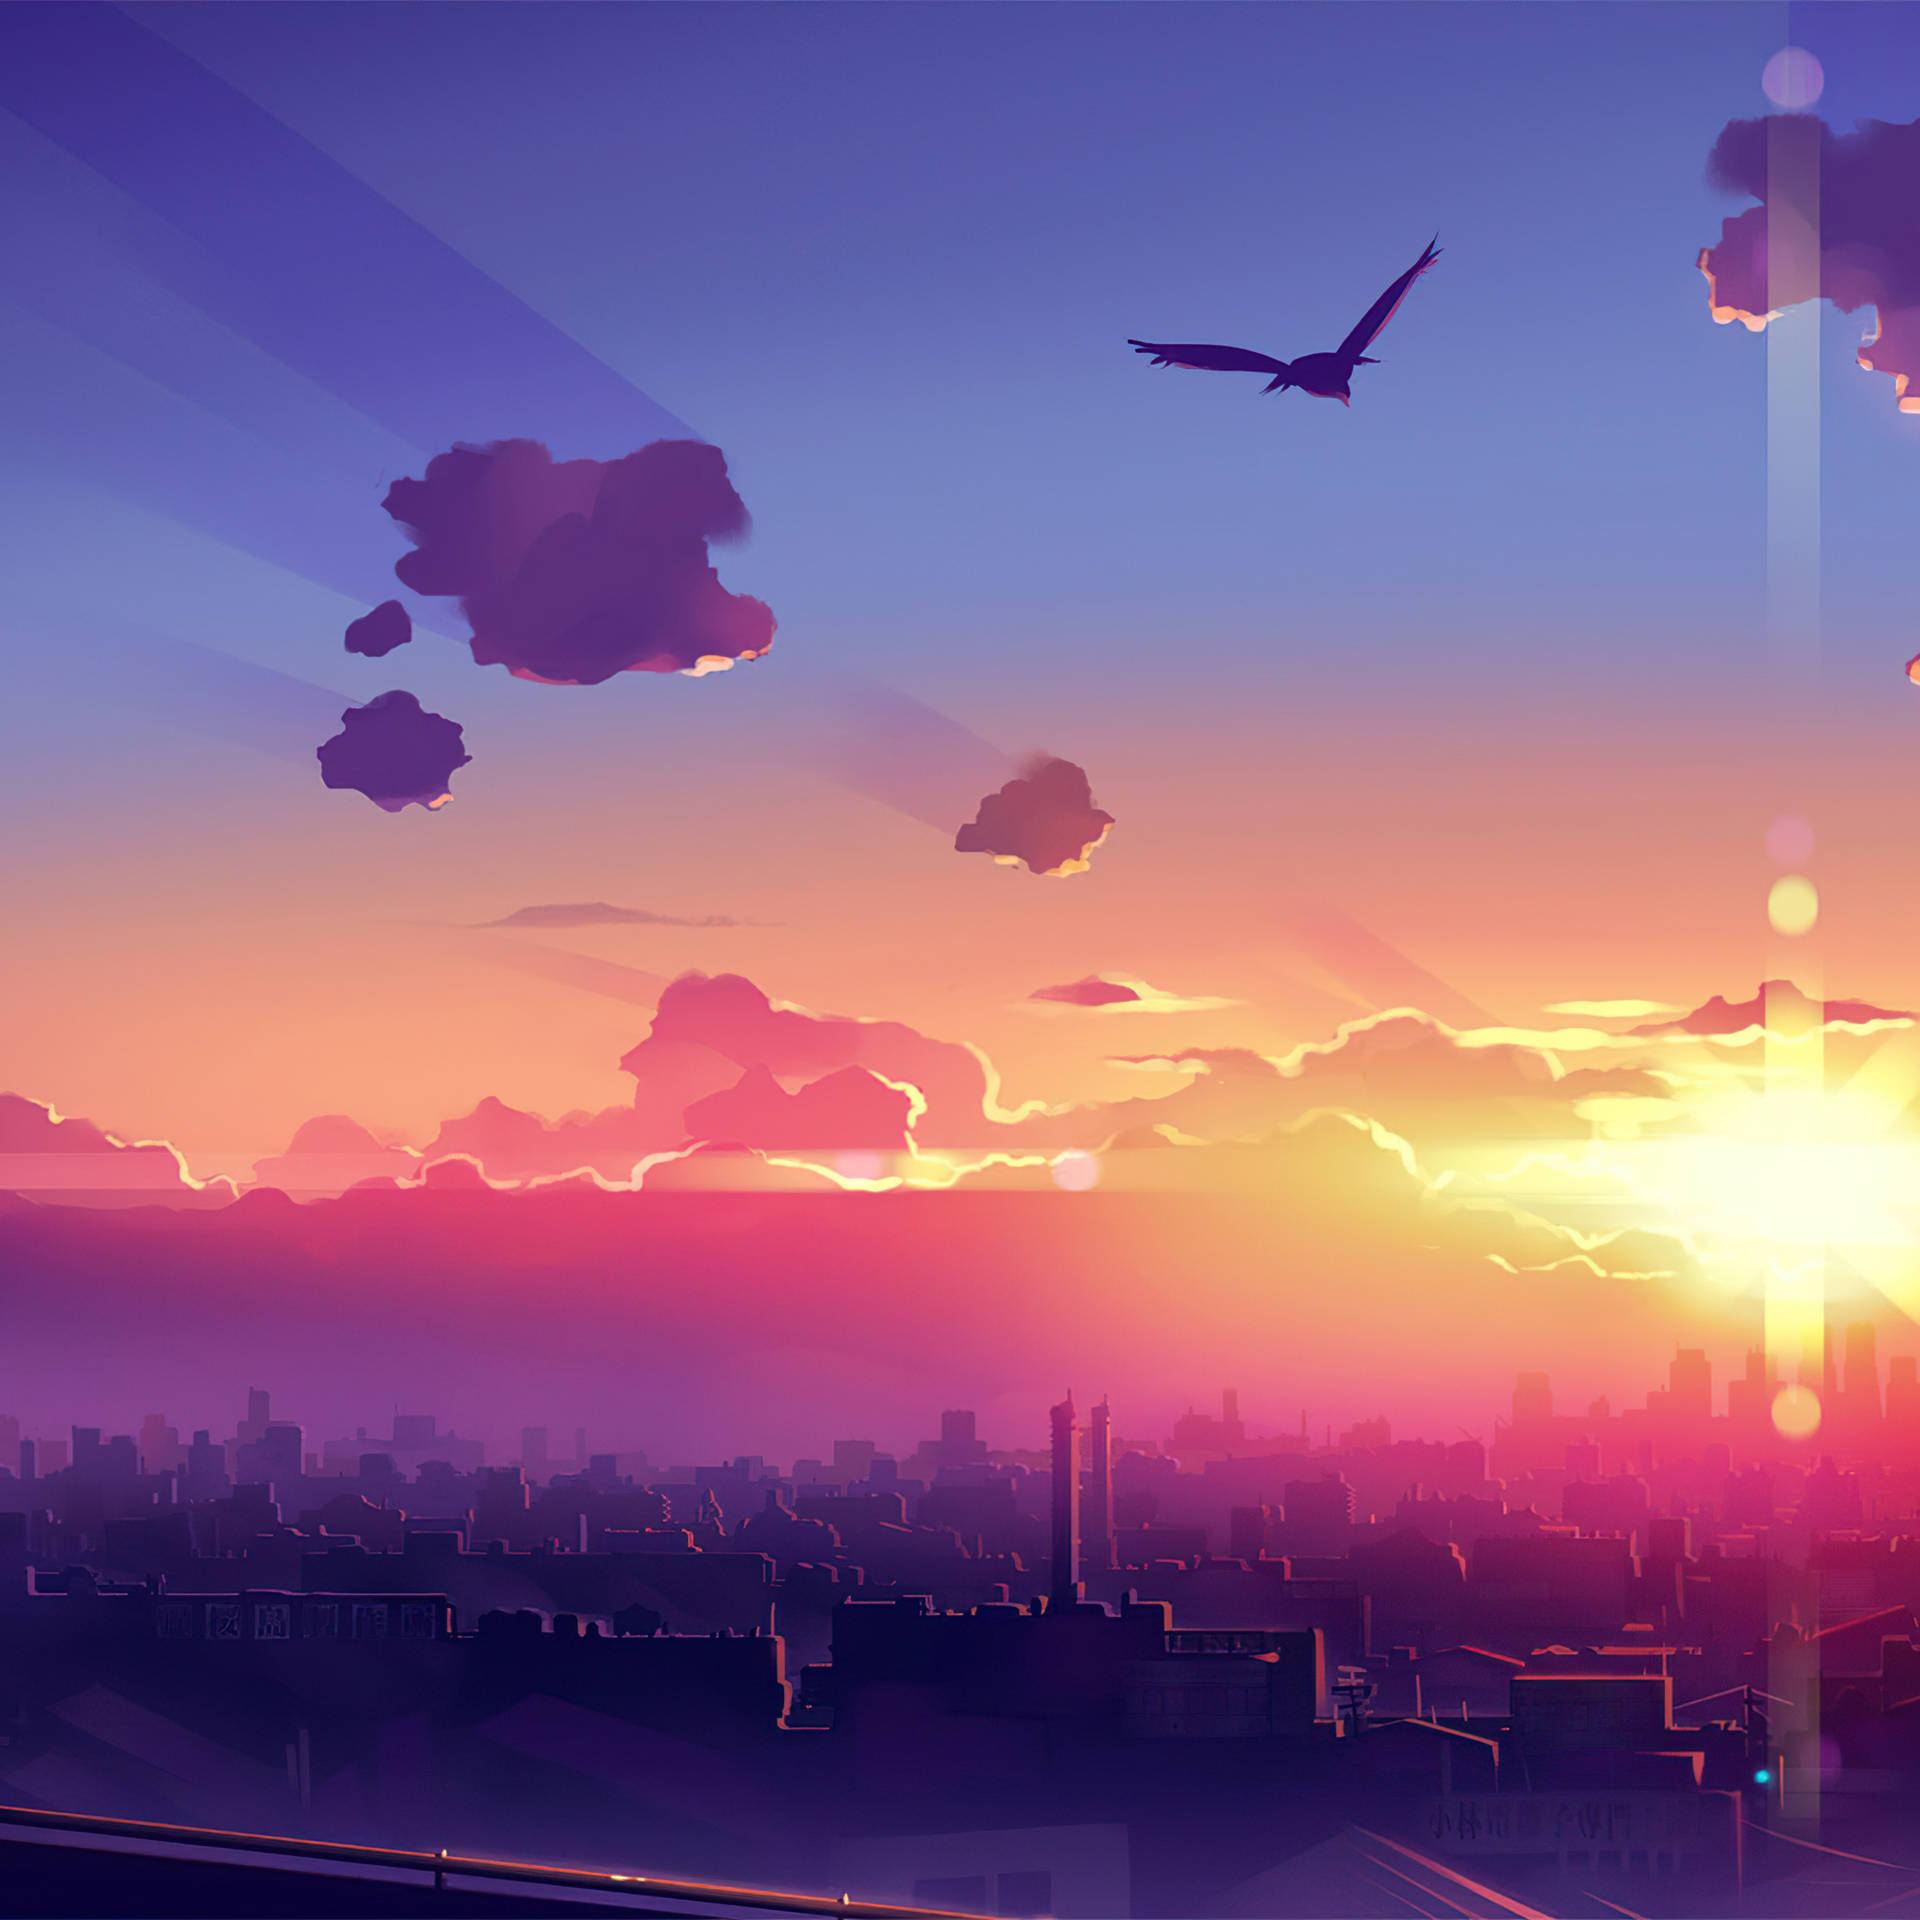 Tranquil Anime City during Sunset on an iPad Wallpaper